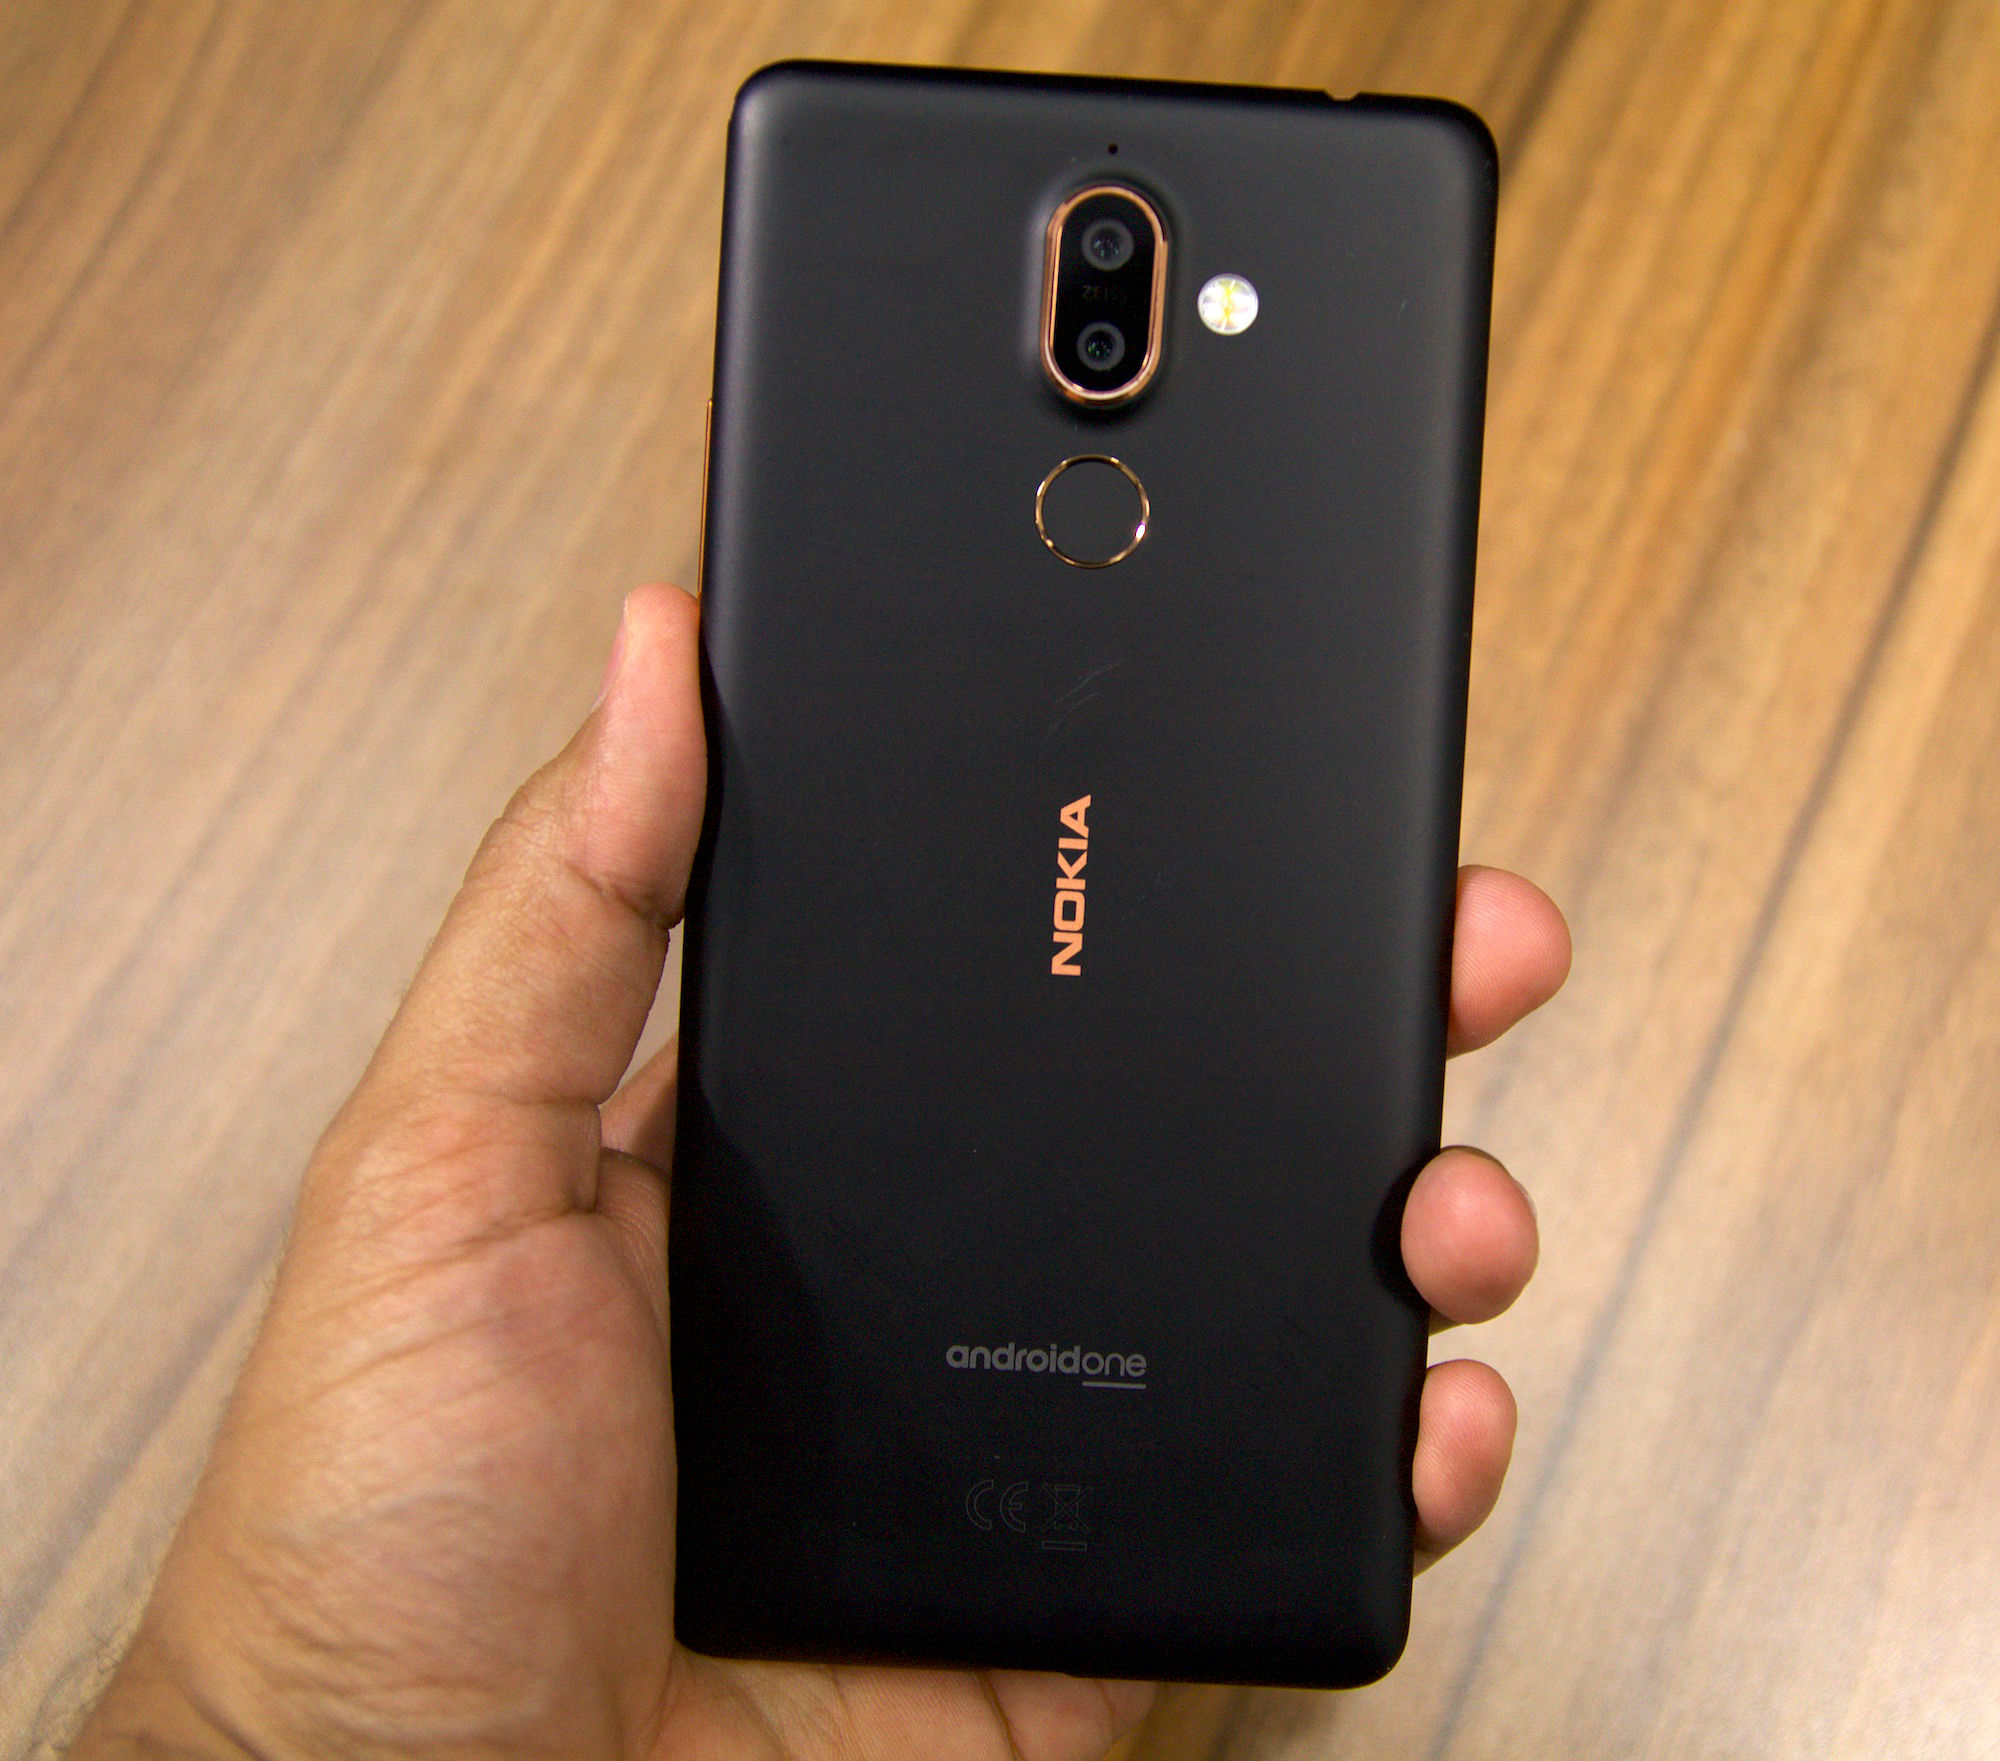 Nokia 7 Plus units have started getting Android 10 upgrades too